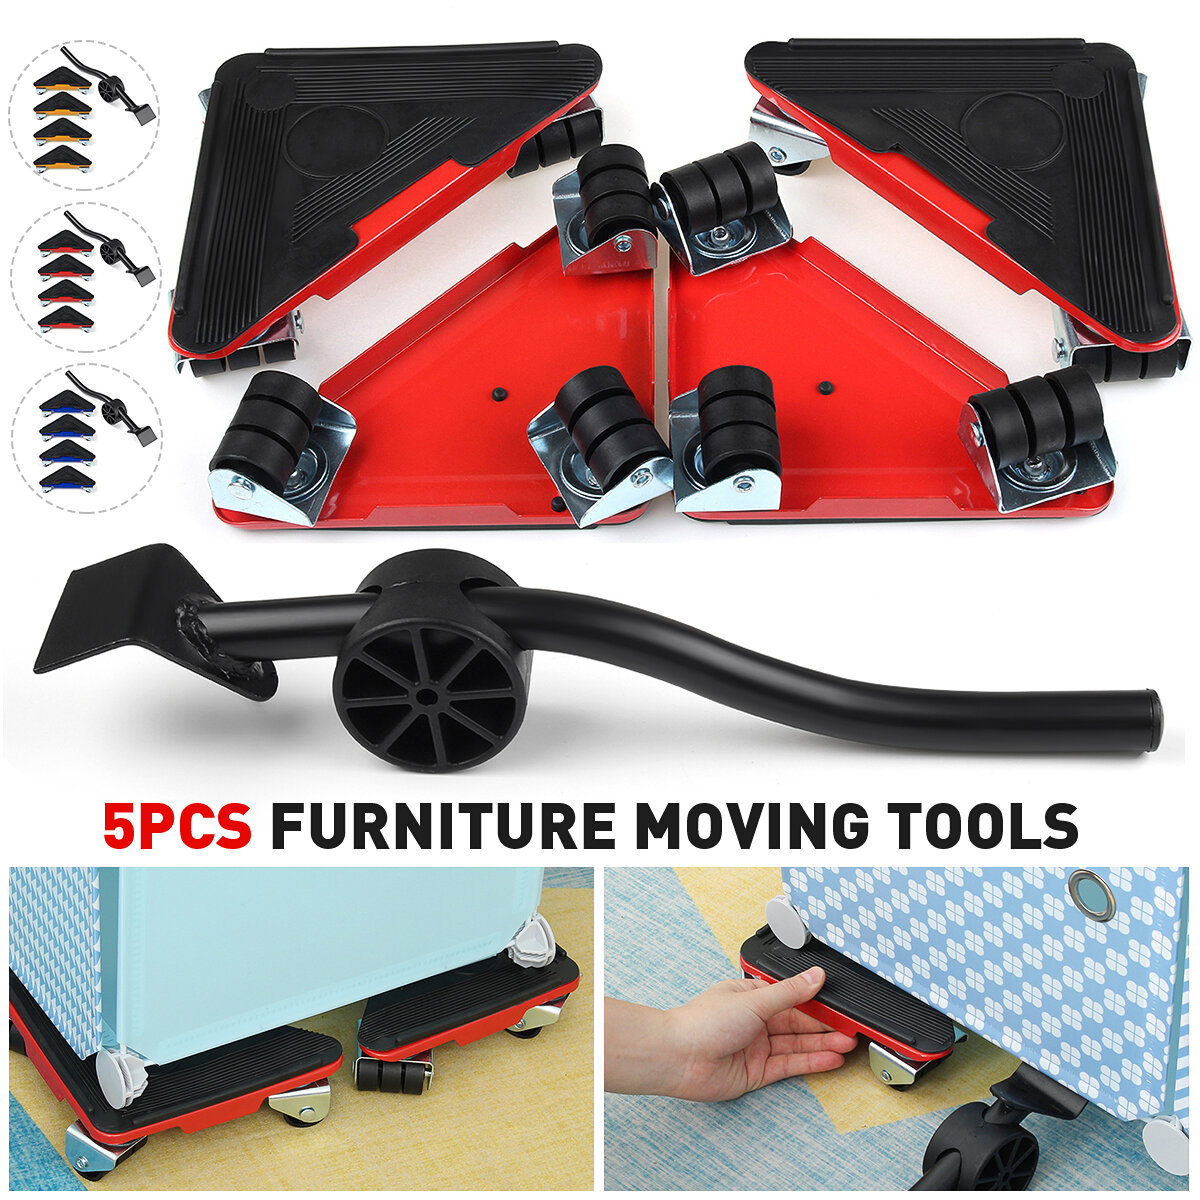 

5pcs Heavy Duty Furniture Slider Lifter Movers Tool Kit Roller Transport Trolley